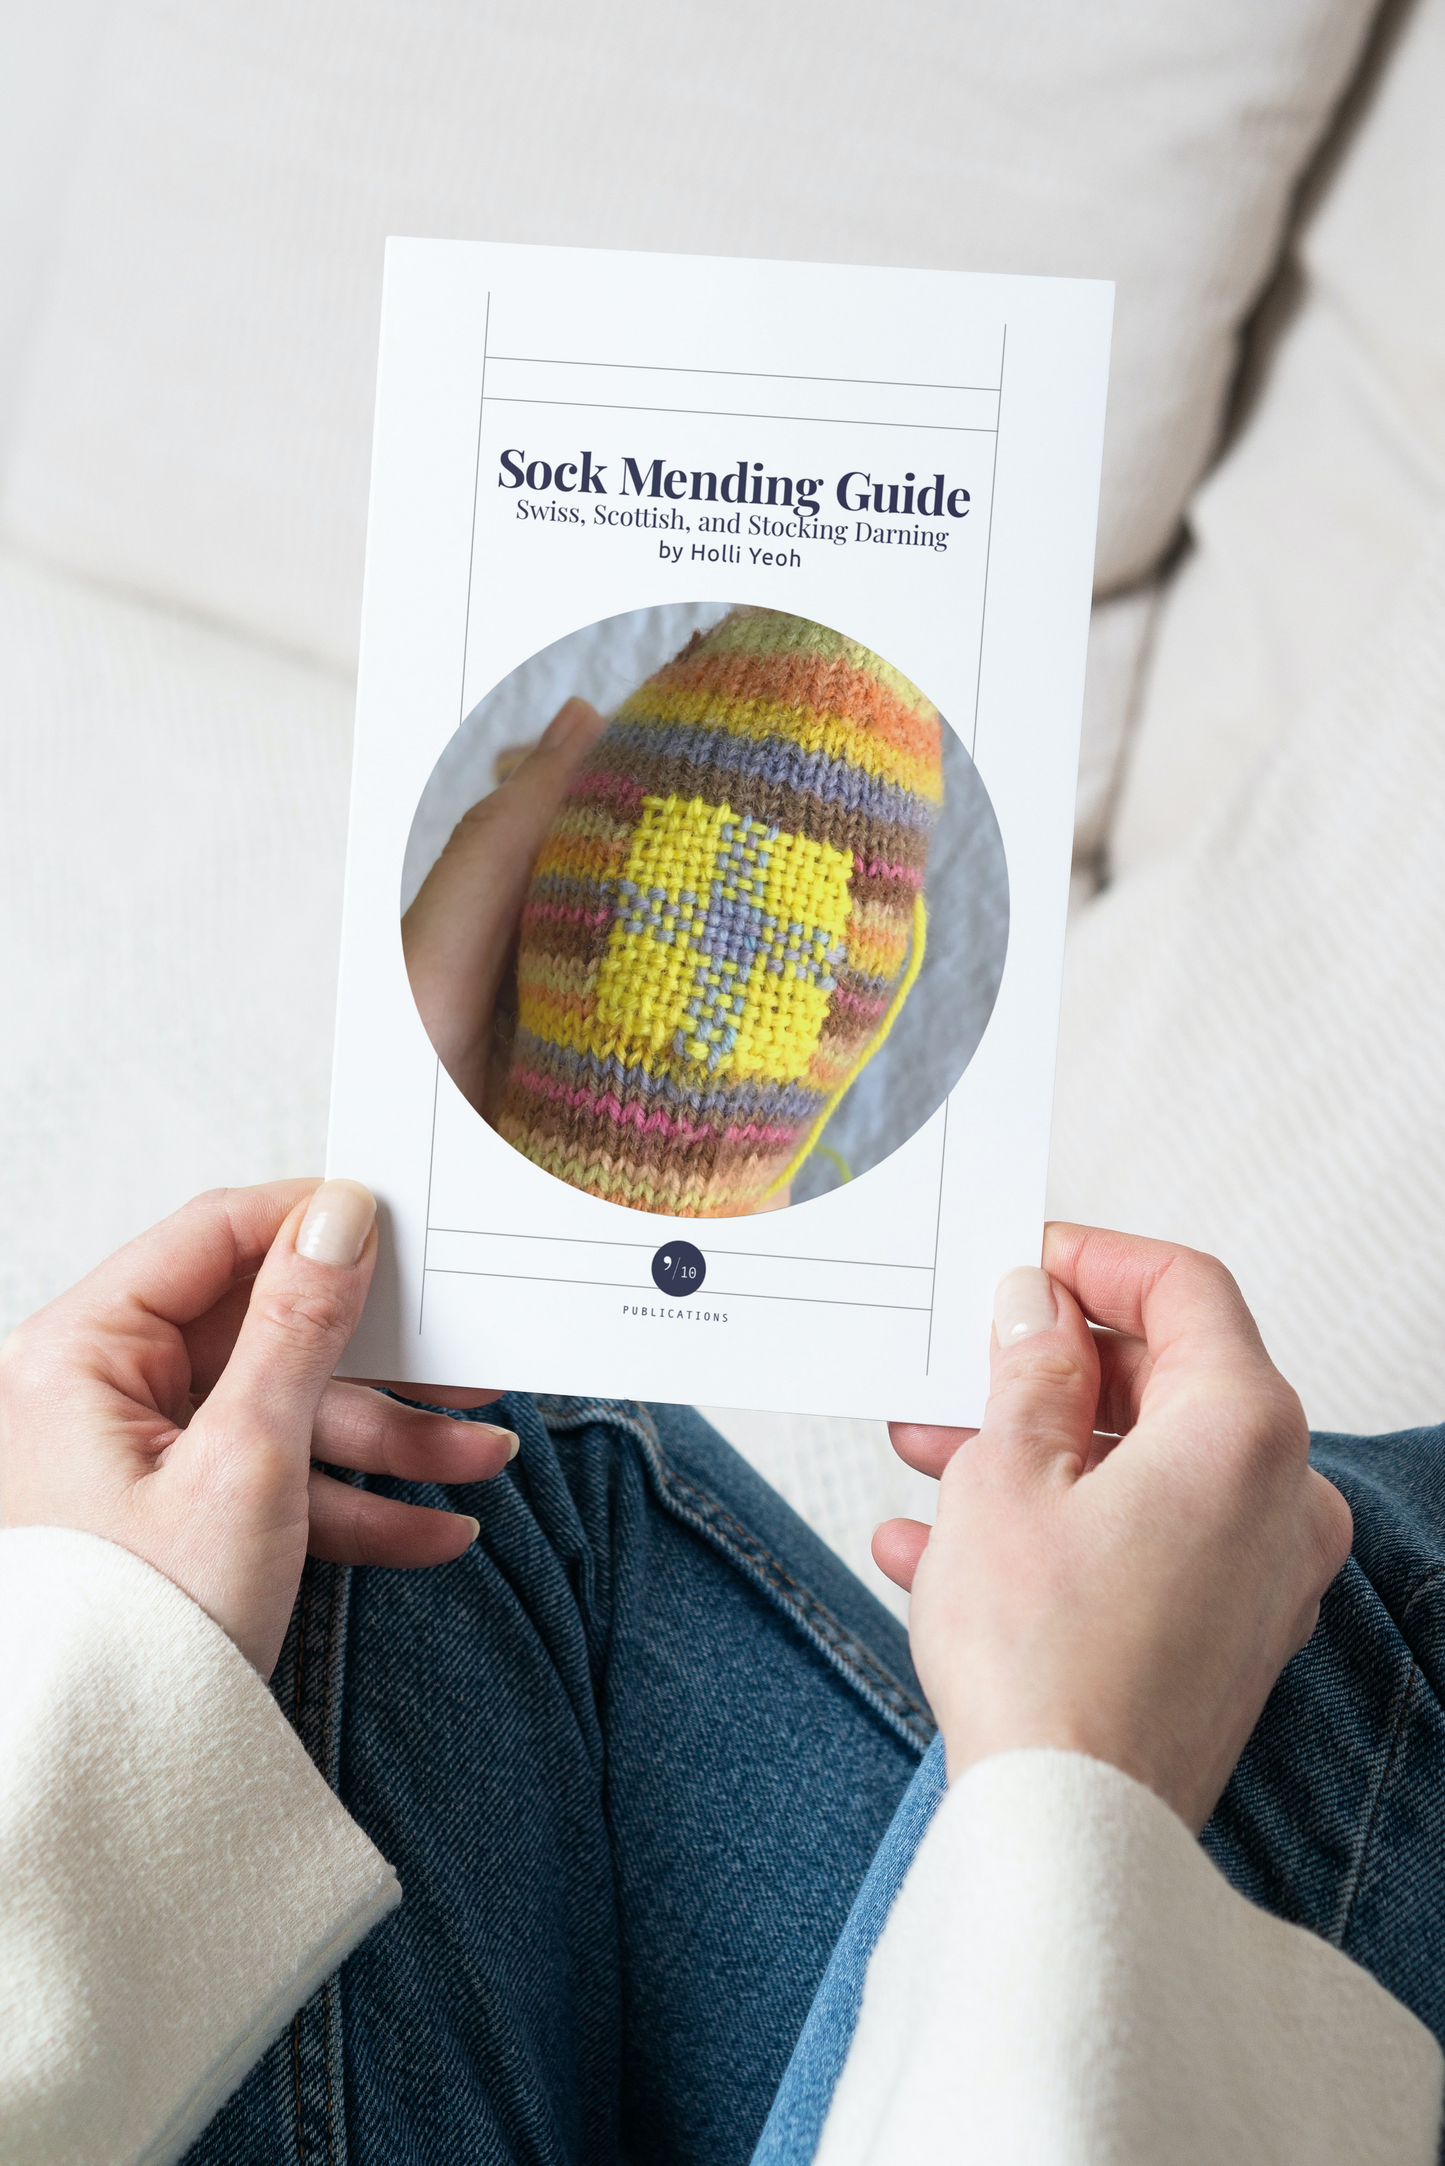 Sock Mending Guide, by Holli Yeoh